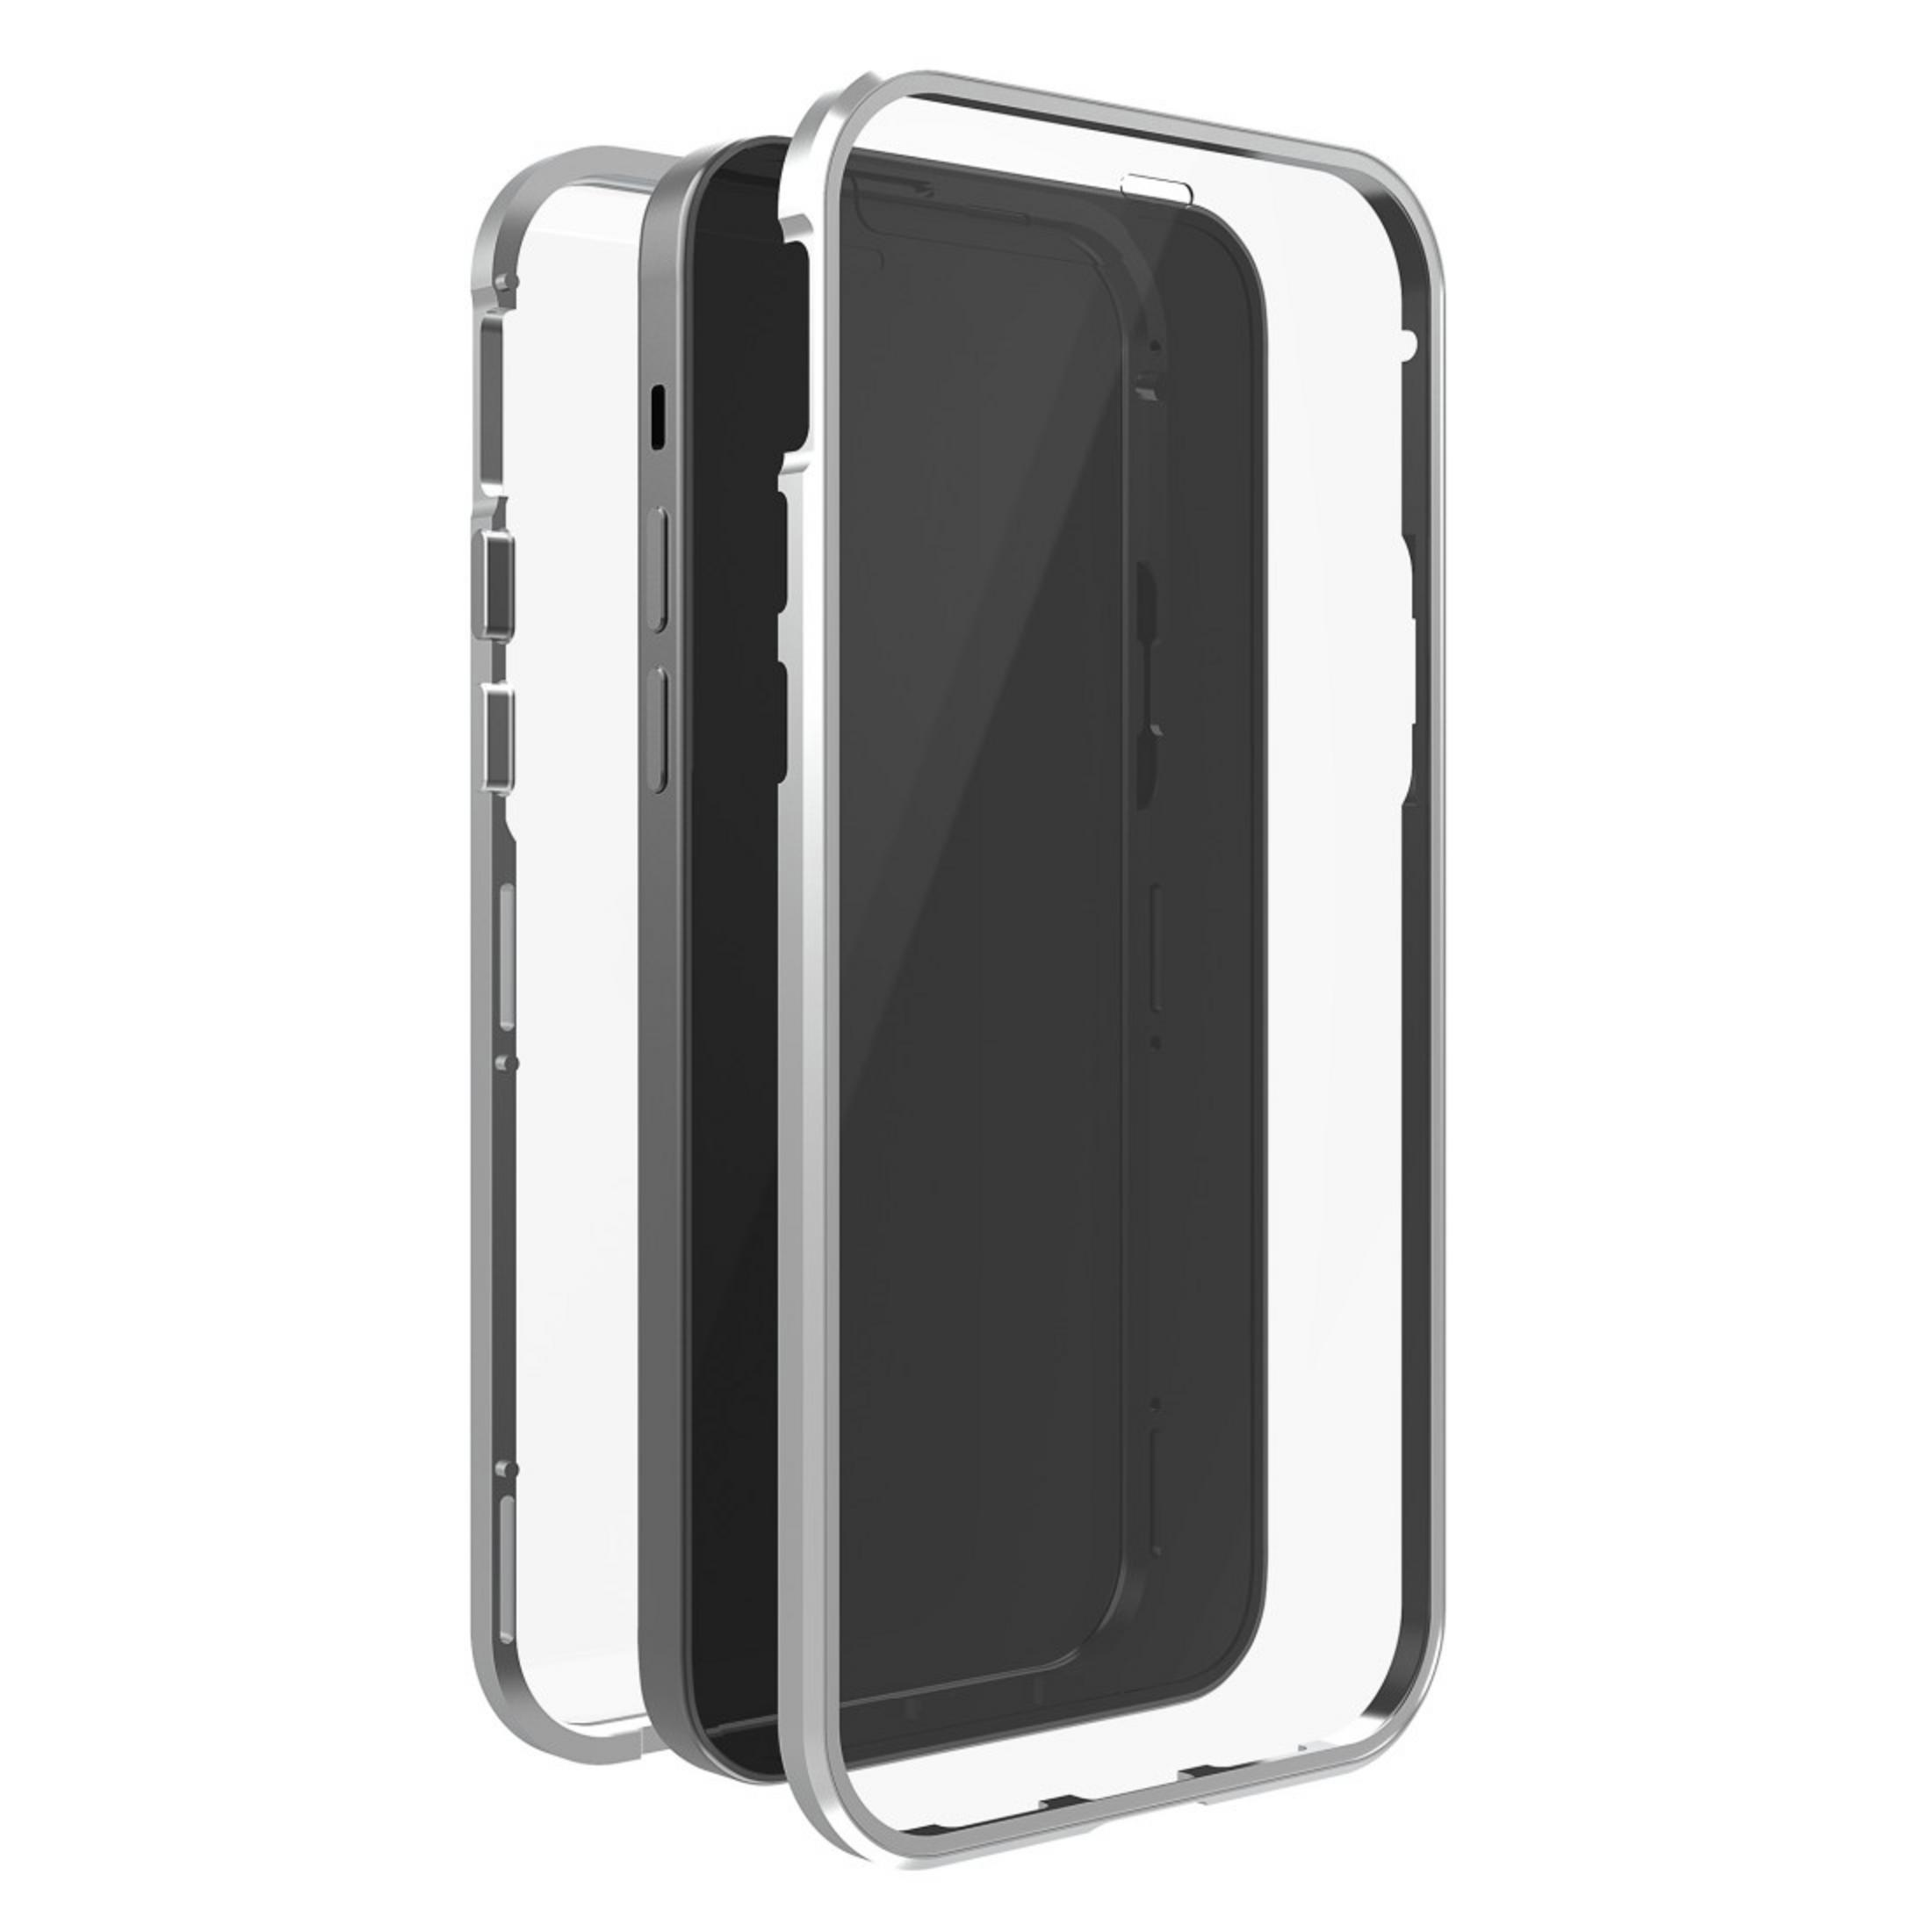 BLACK ROCK COVER SILBER, 217024 Full Apple, IPH13 360 PRO GLASS Cover, Silber 13 Pro, iPhone